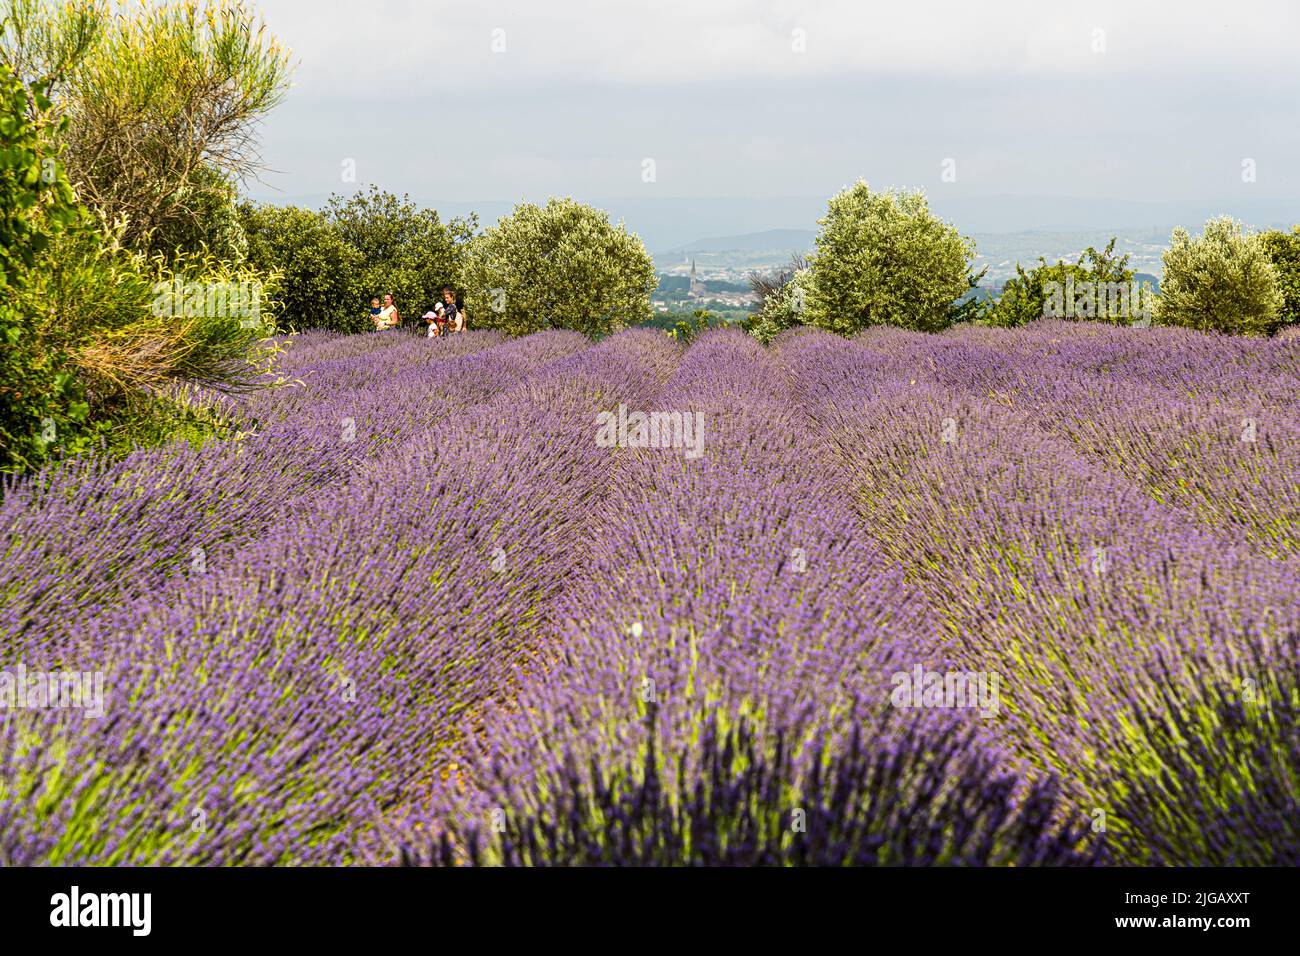 The lavender bloom in Provence always attracts visitors. This lavender field in Gignac is the only one in the Hérault department of the French Occitanie region. The lavender fields are also used as an event location. As soon as the flowering begins, there are picnics or dinners with several courses at the fragrant field Stock Photo